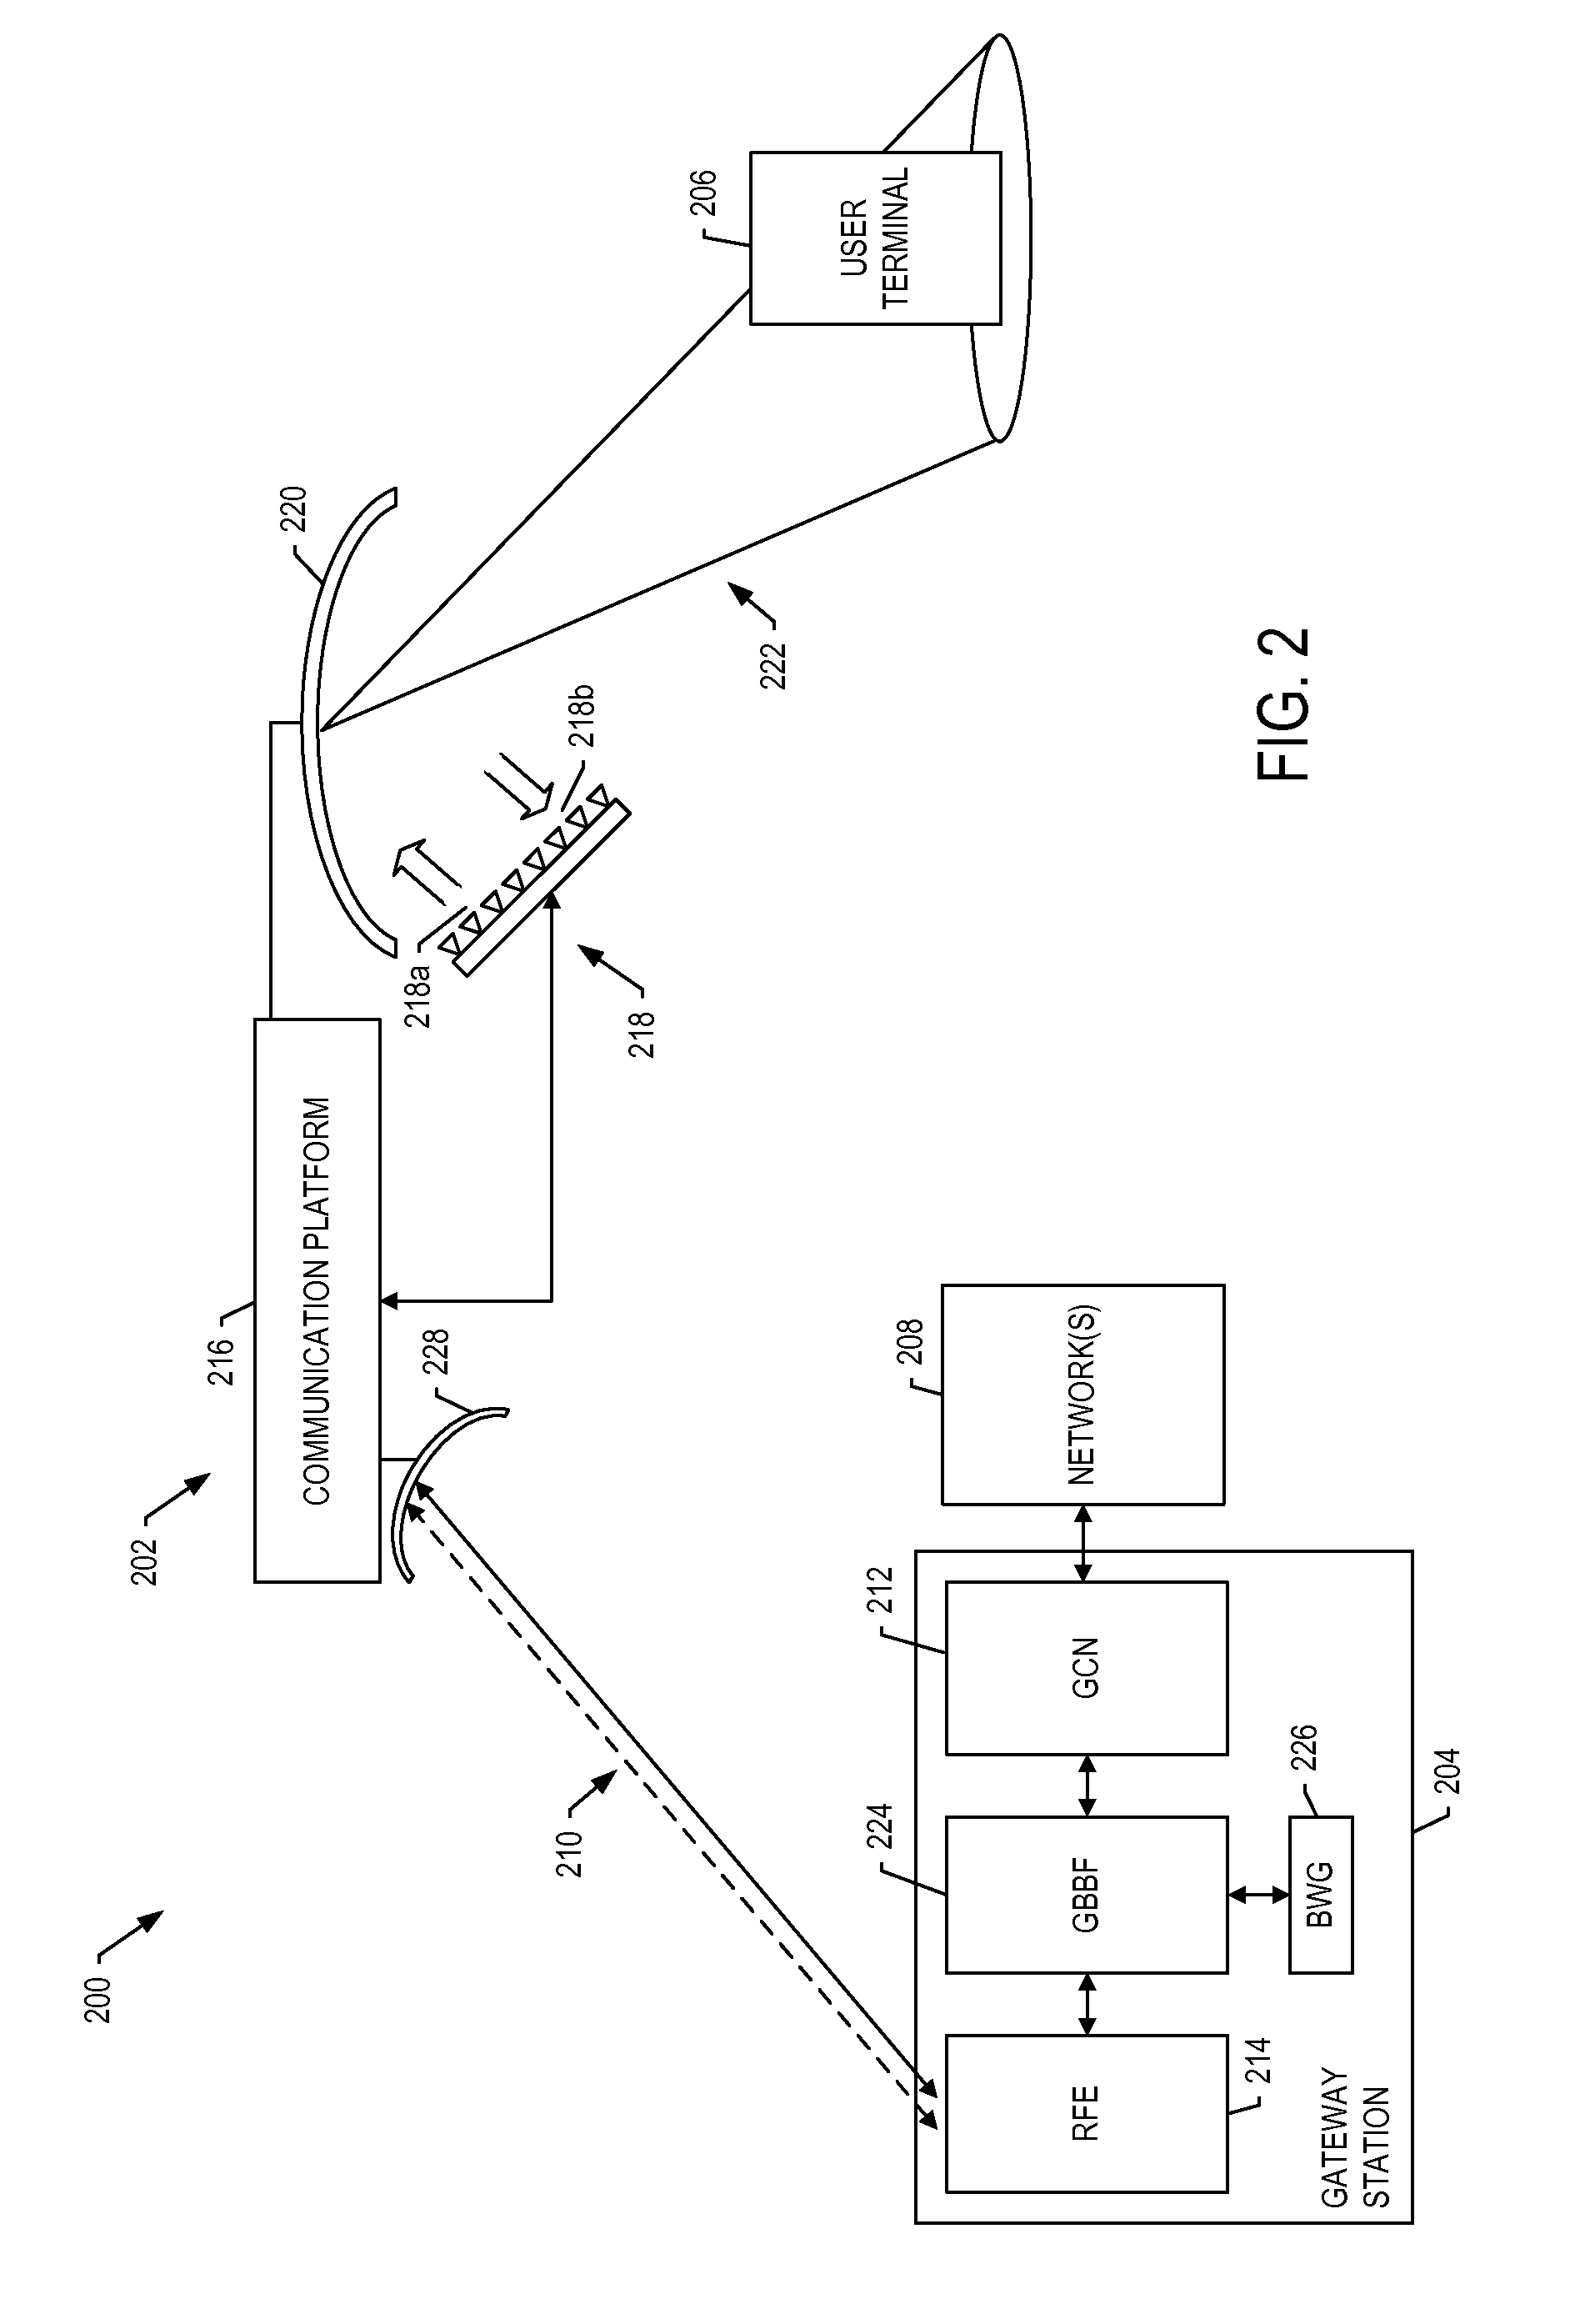 Compensating for a non-ideal surface of a reflector in a satellite communication system